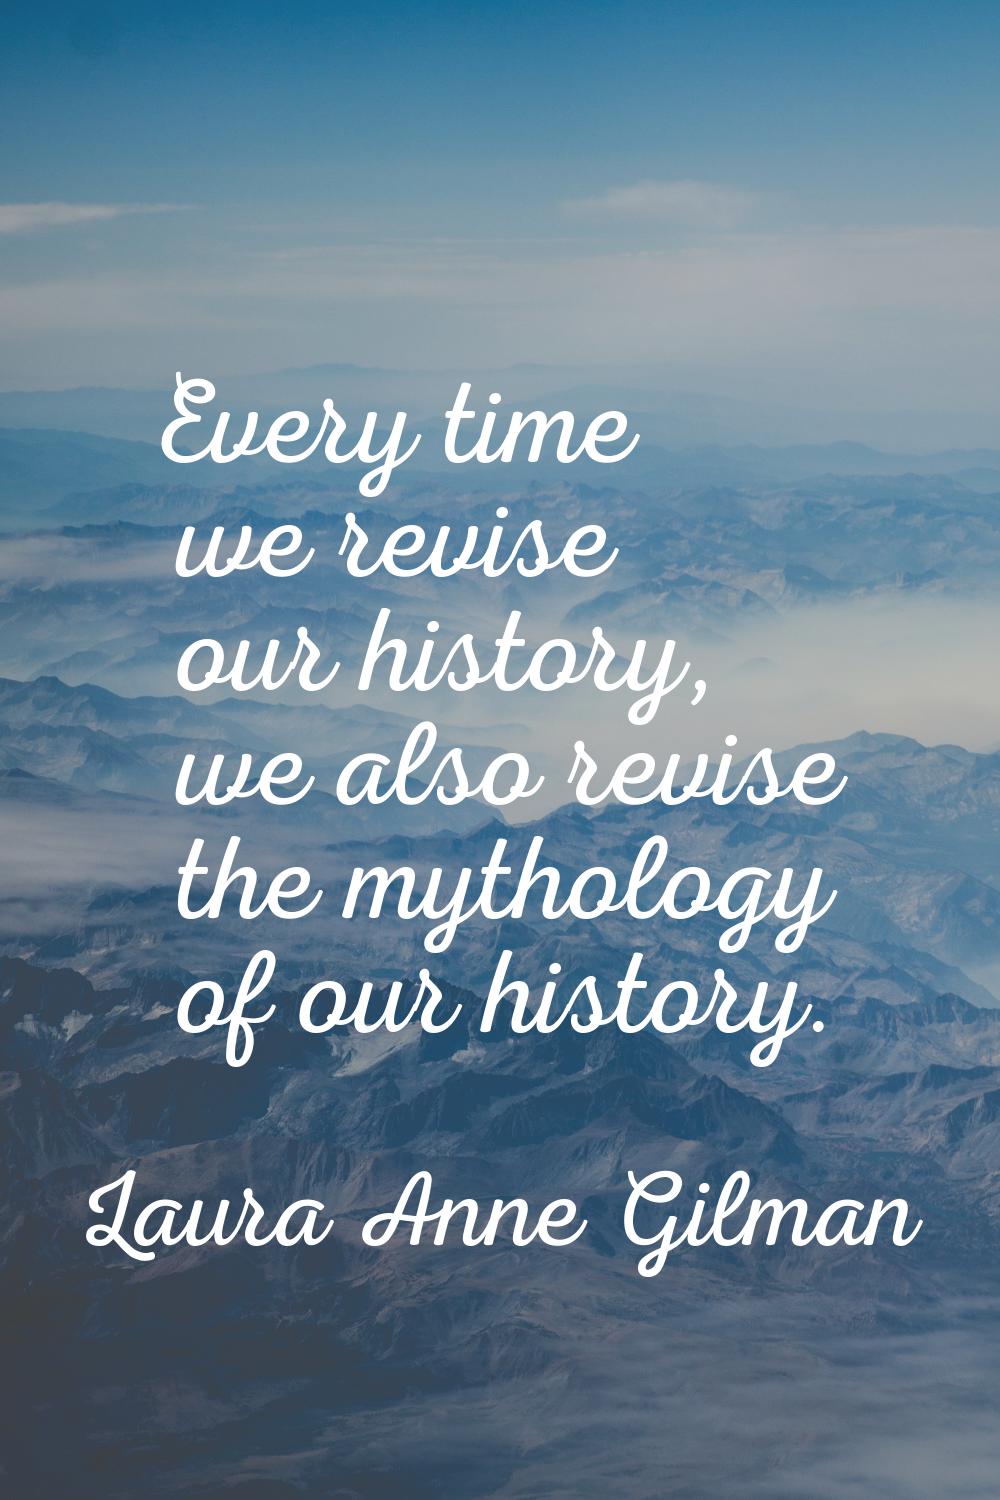 Every time we revise our history, we also revise the mythology of our history.